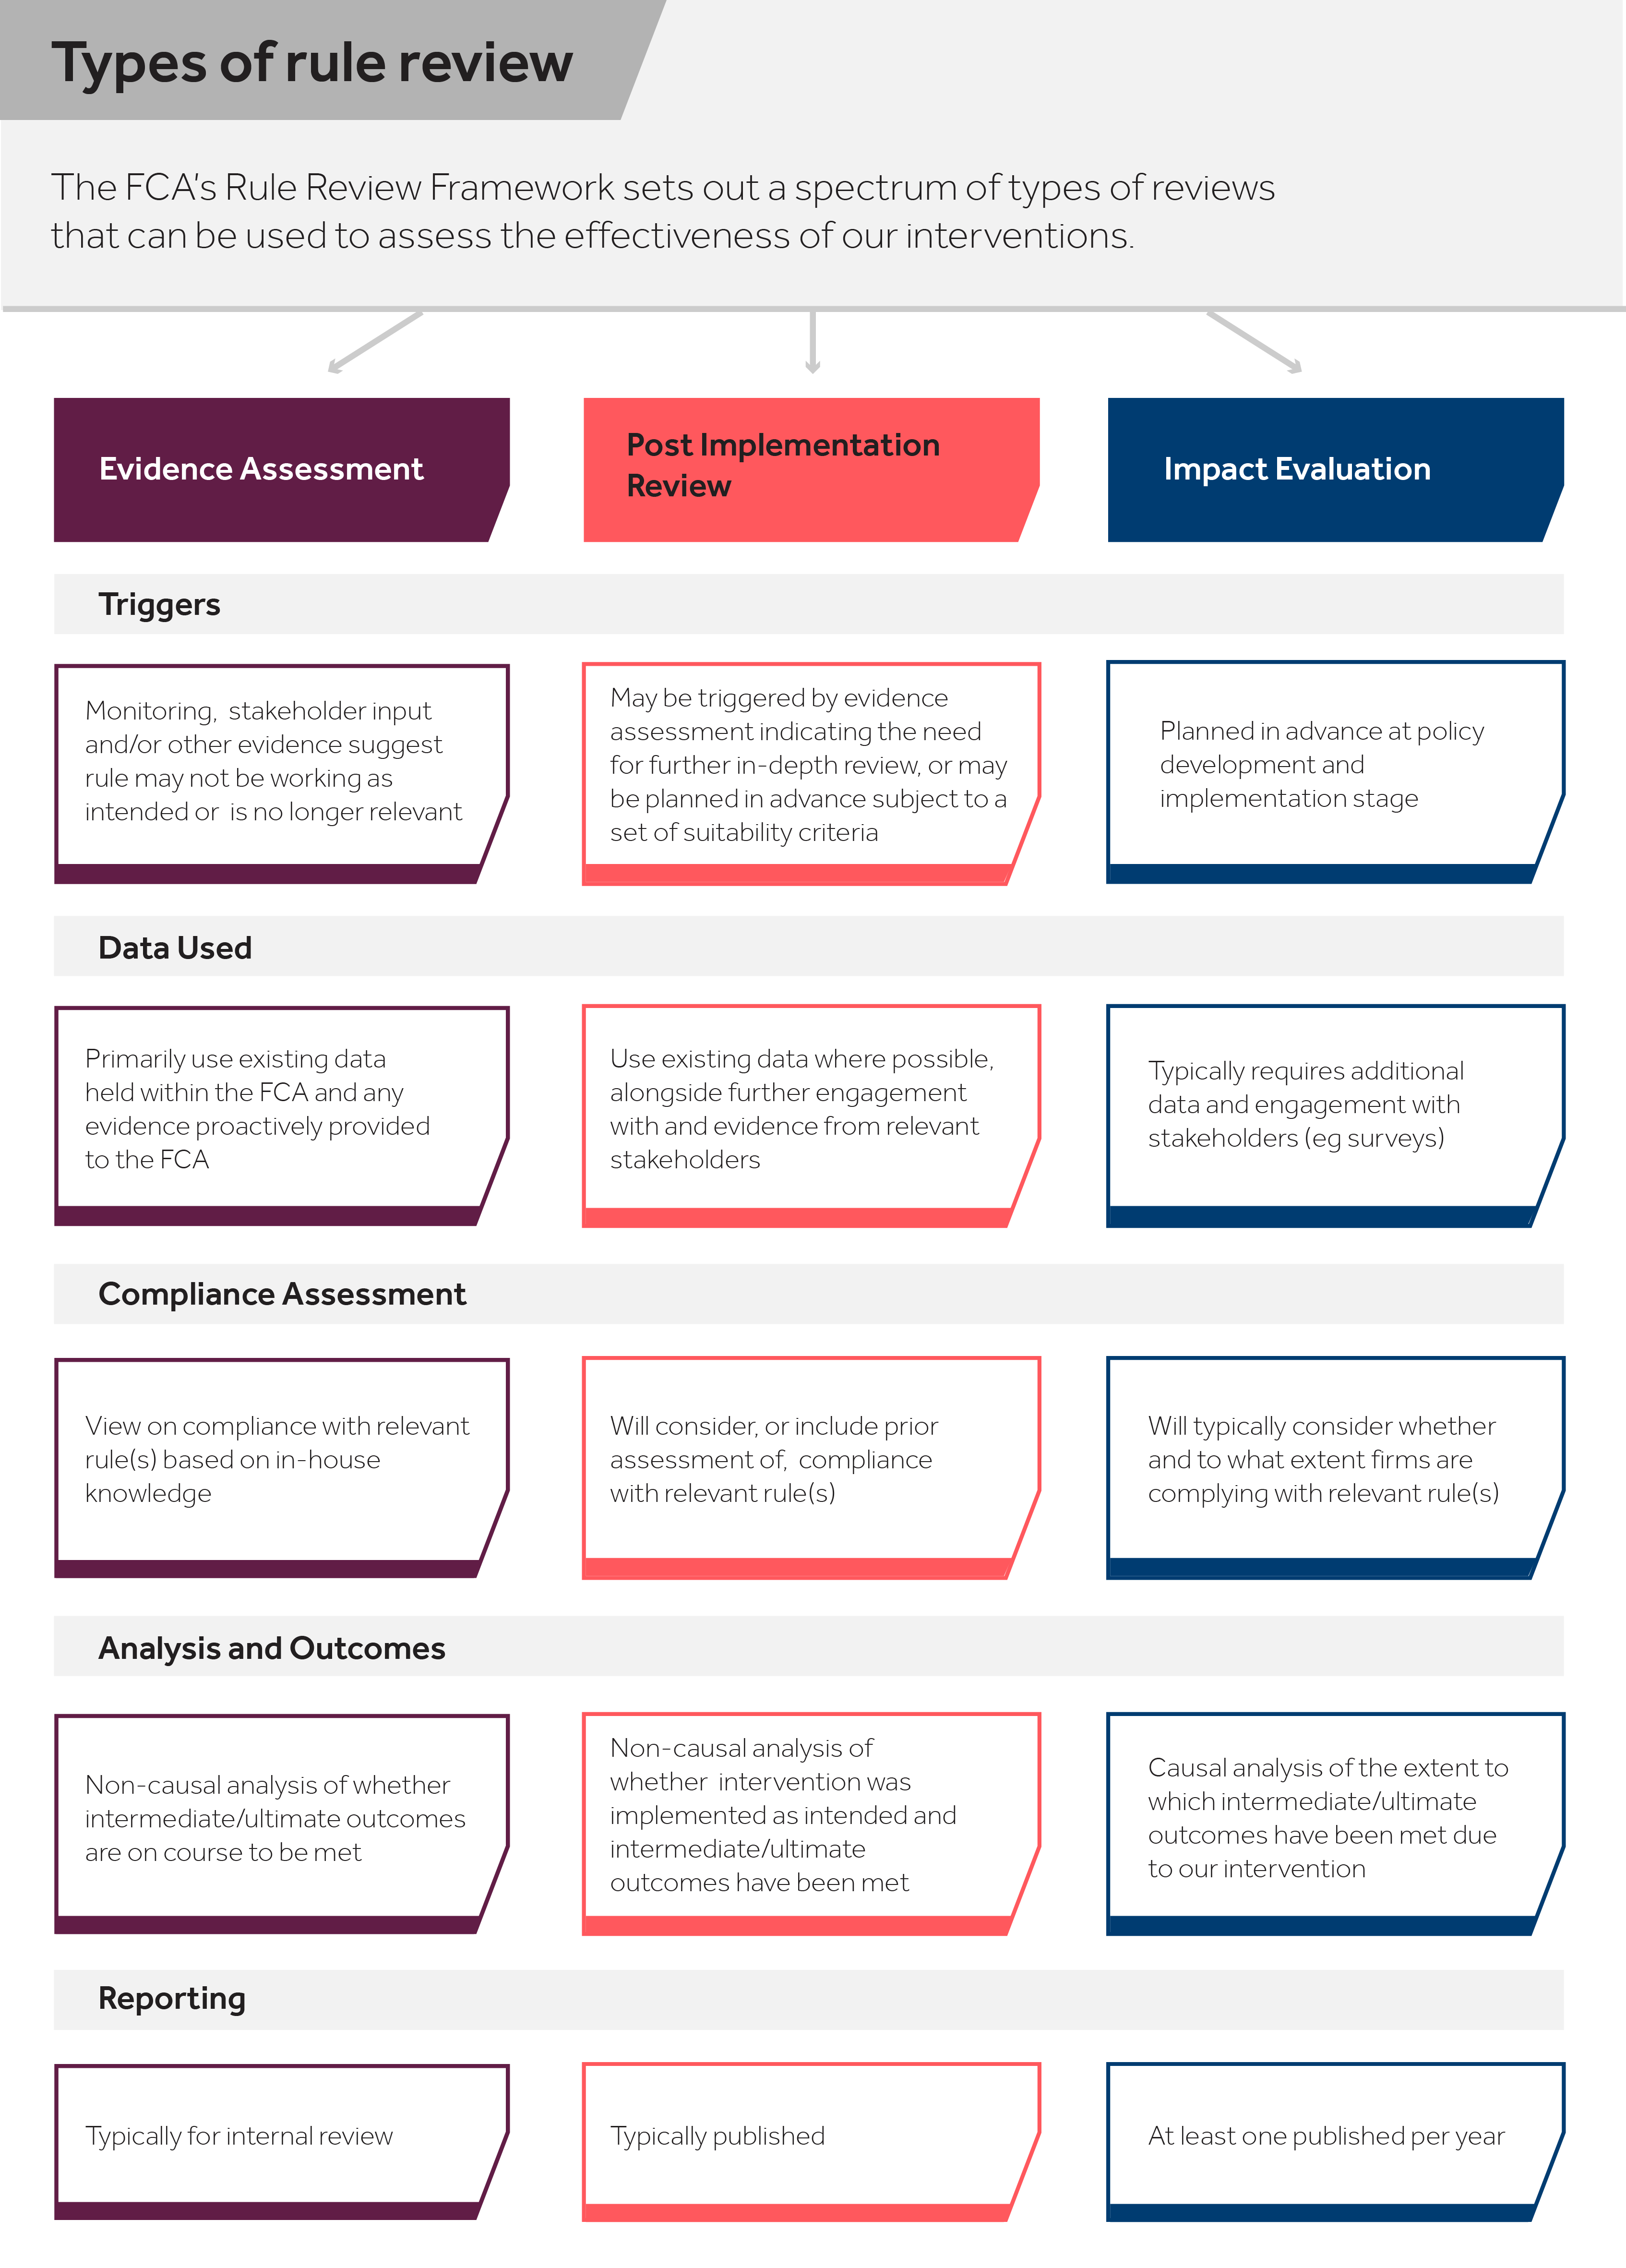 Figure 3: Comparison of types of review